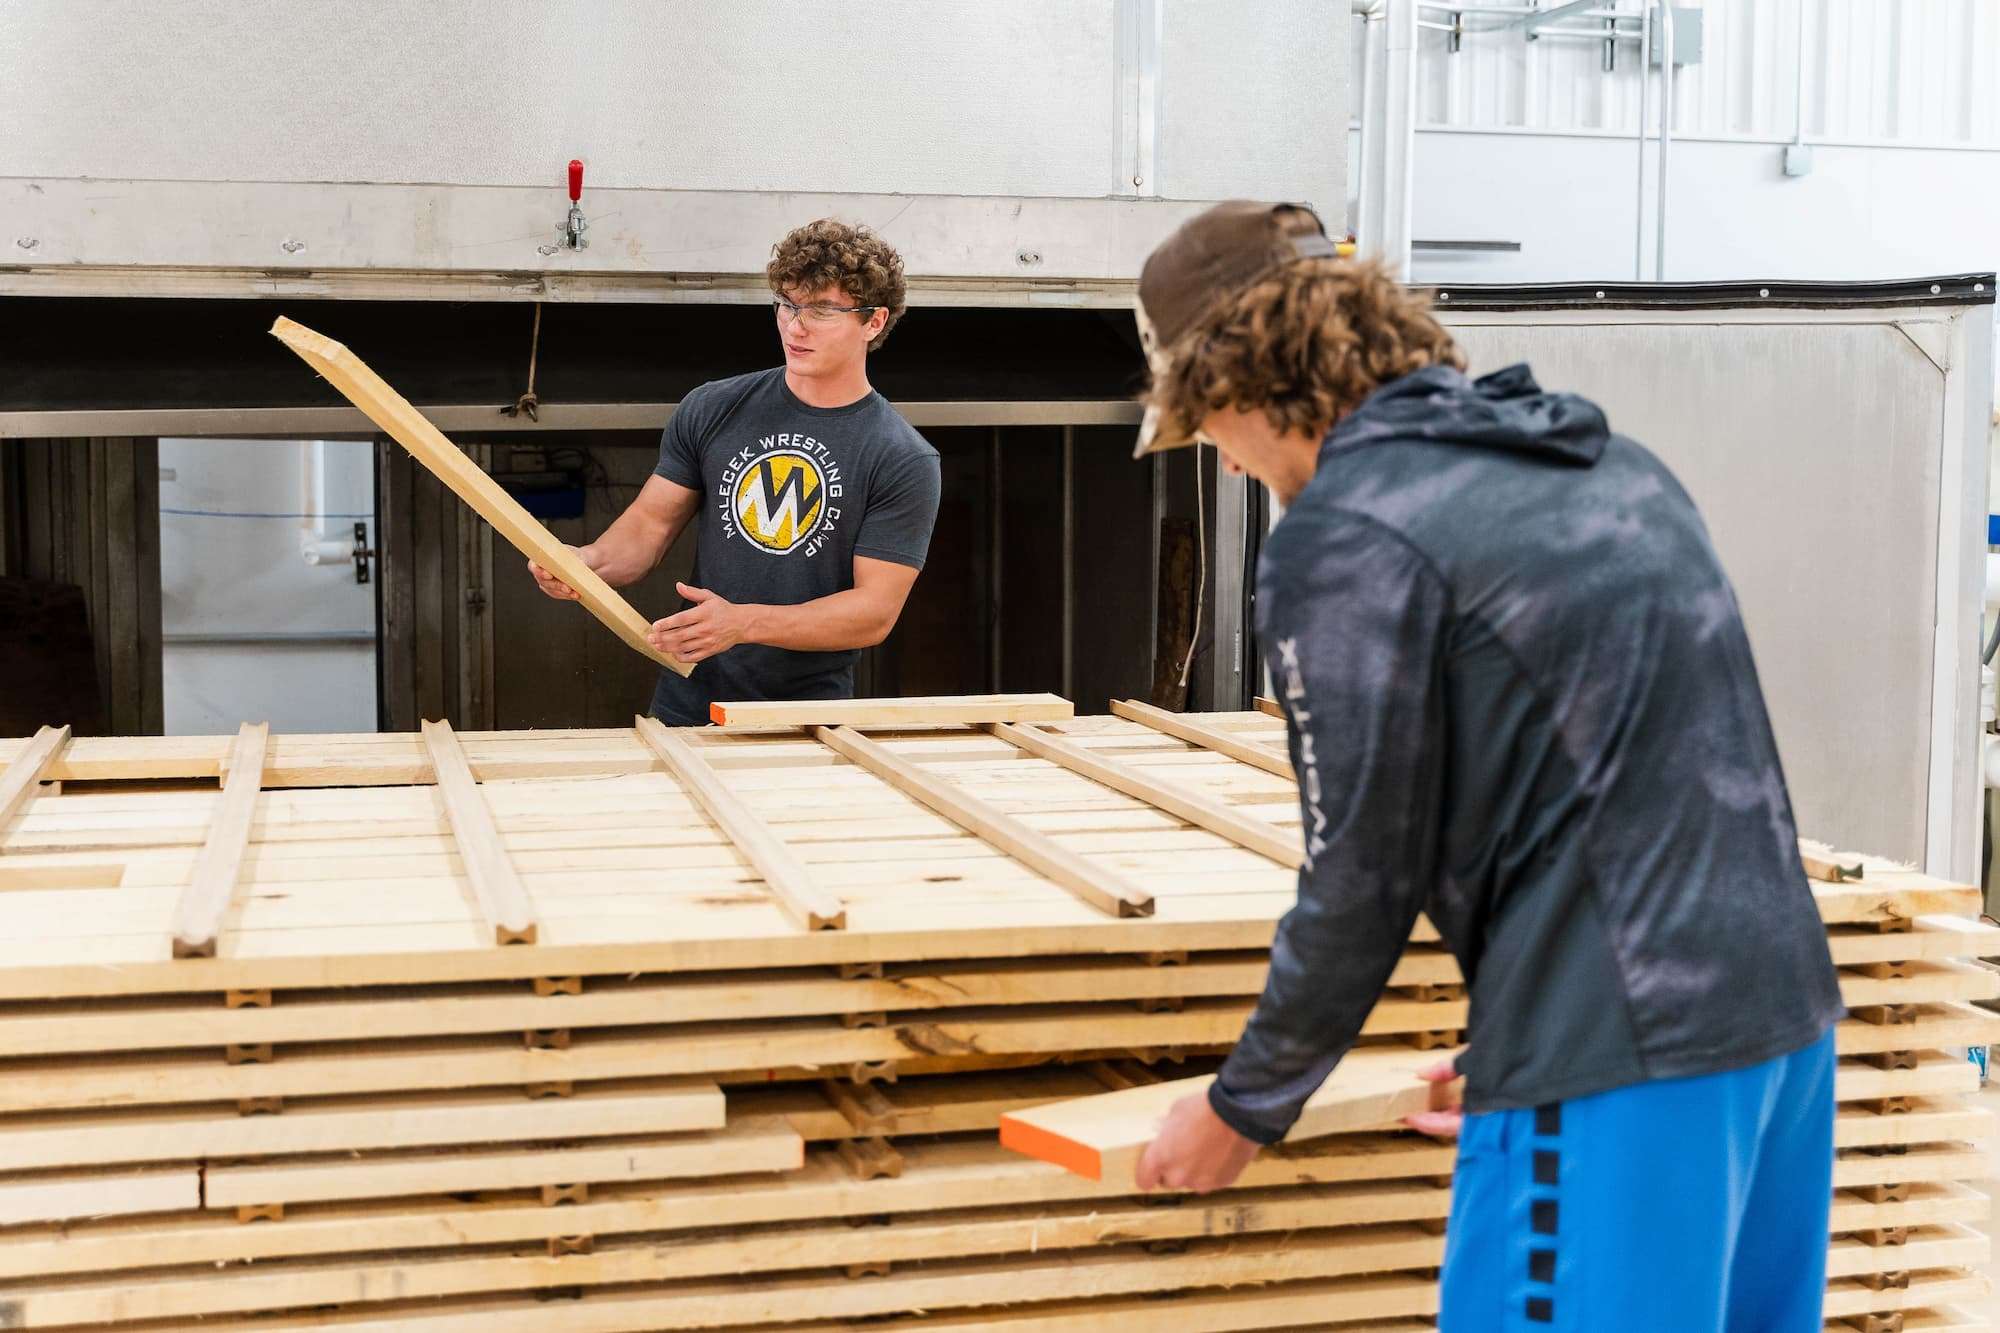 Two students examine lumber that is about to be moved into a kiln.